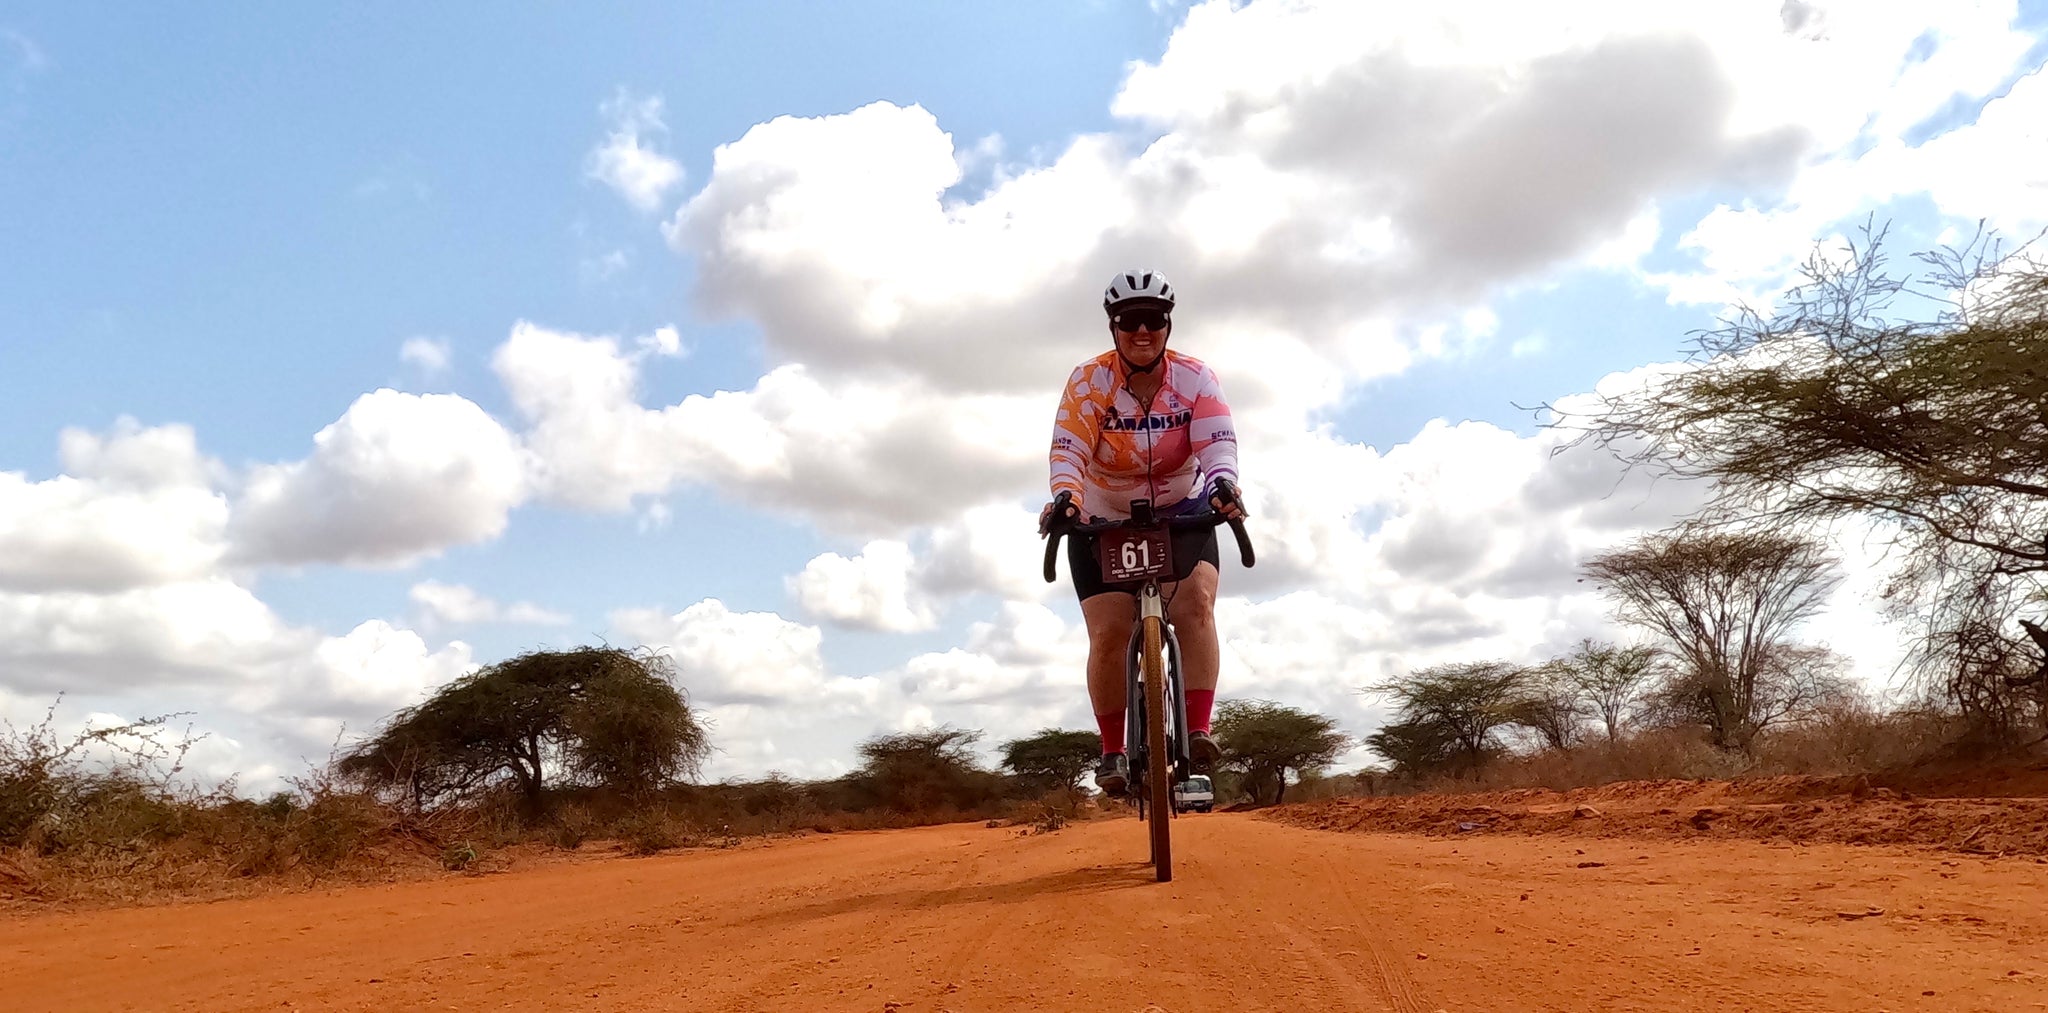 Crystal riding her bike in africa